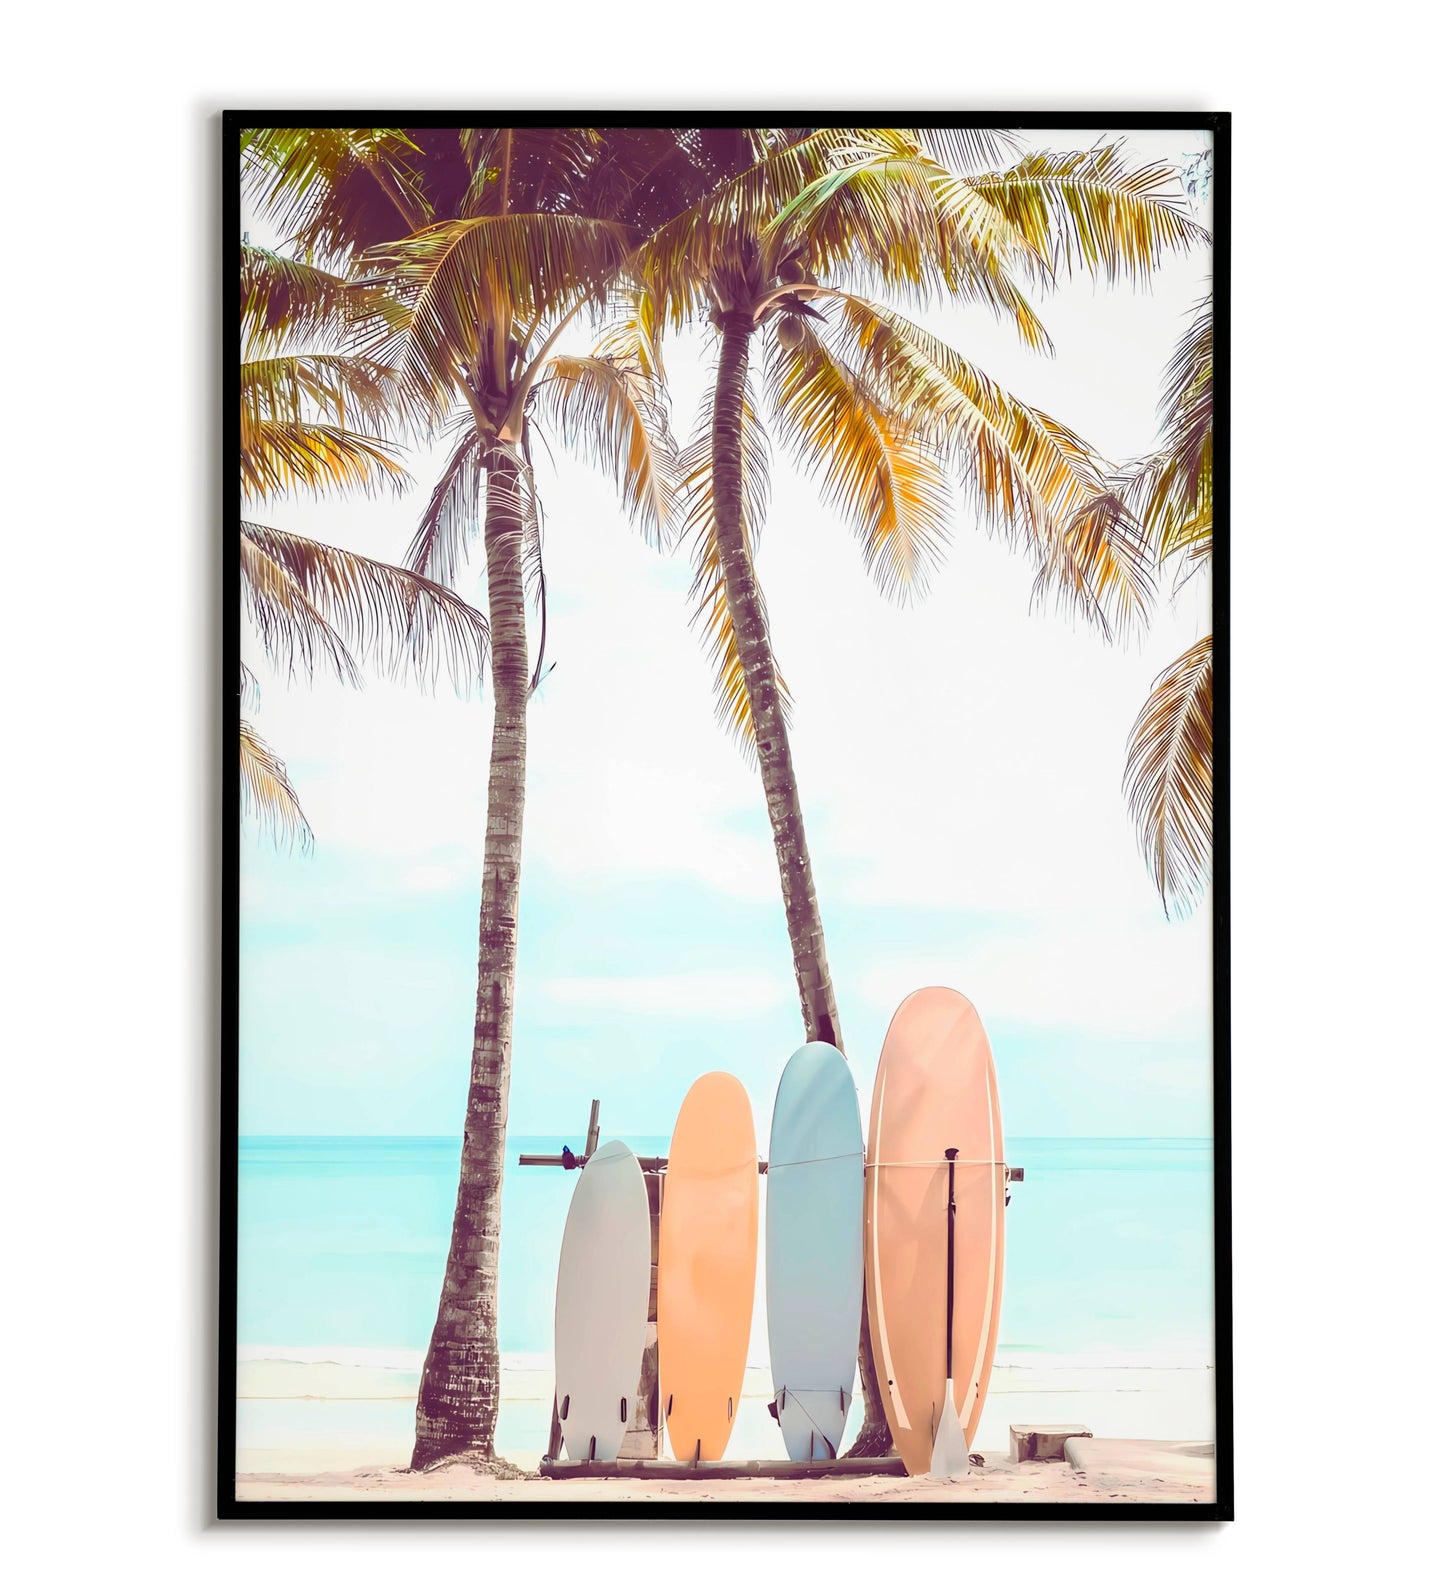 Surfboards by the Beach printable poster. Available for purchase as a physical poster or digital download